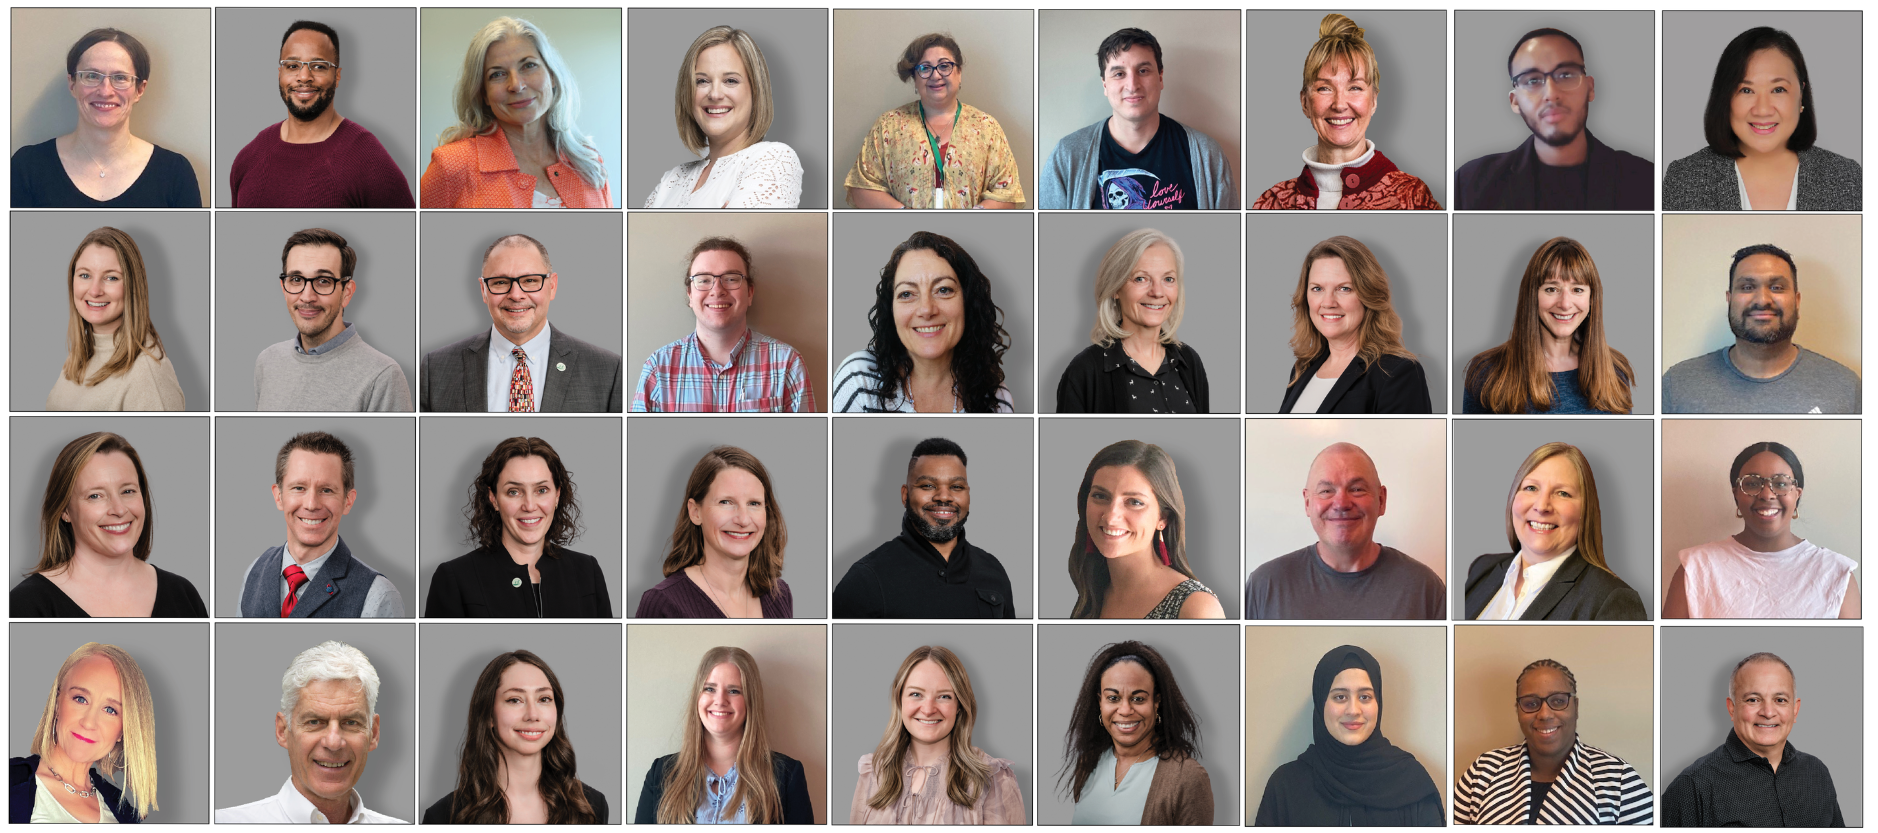 On a light grey background, are individual headshots of The Sinneave Family Foundation Staff members. There are 36 headshot pictures in total, one for each staff member. They are all looking into the camera and smiling in their headshots. 